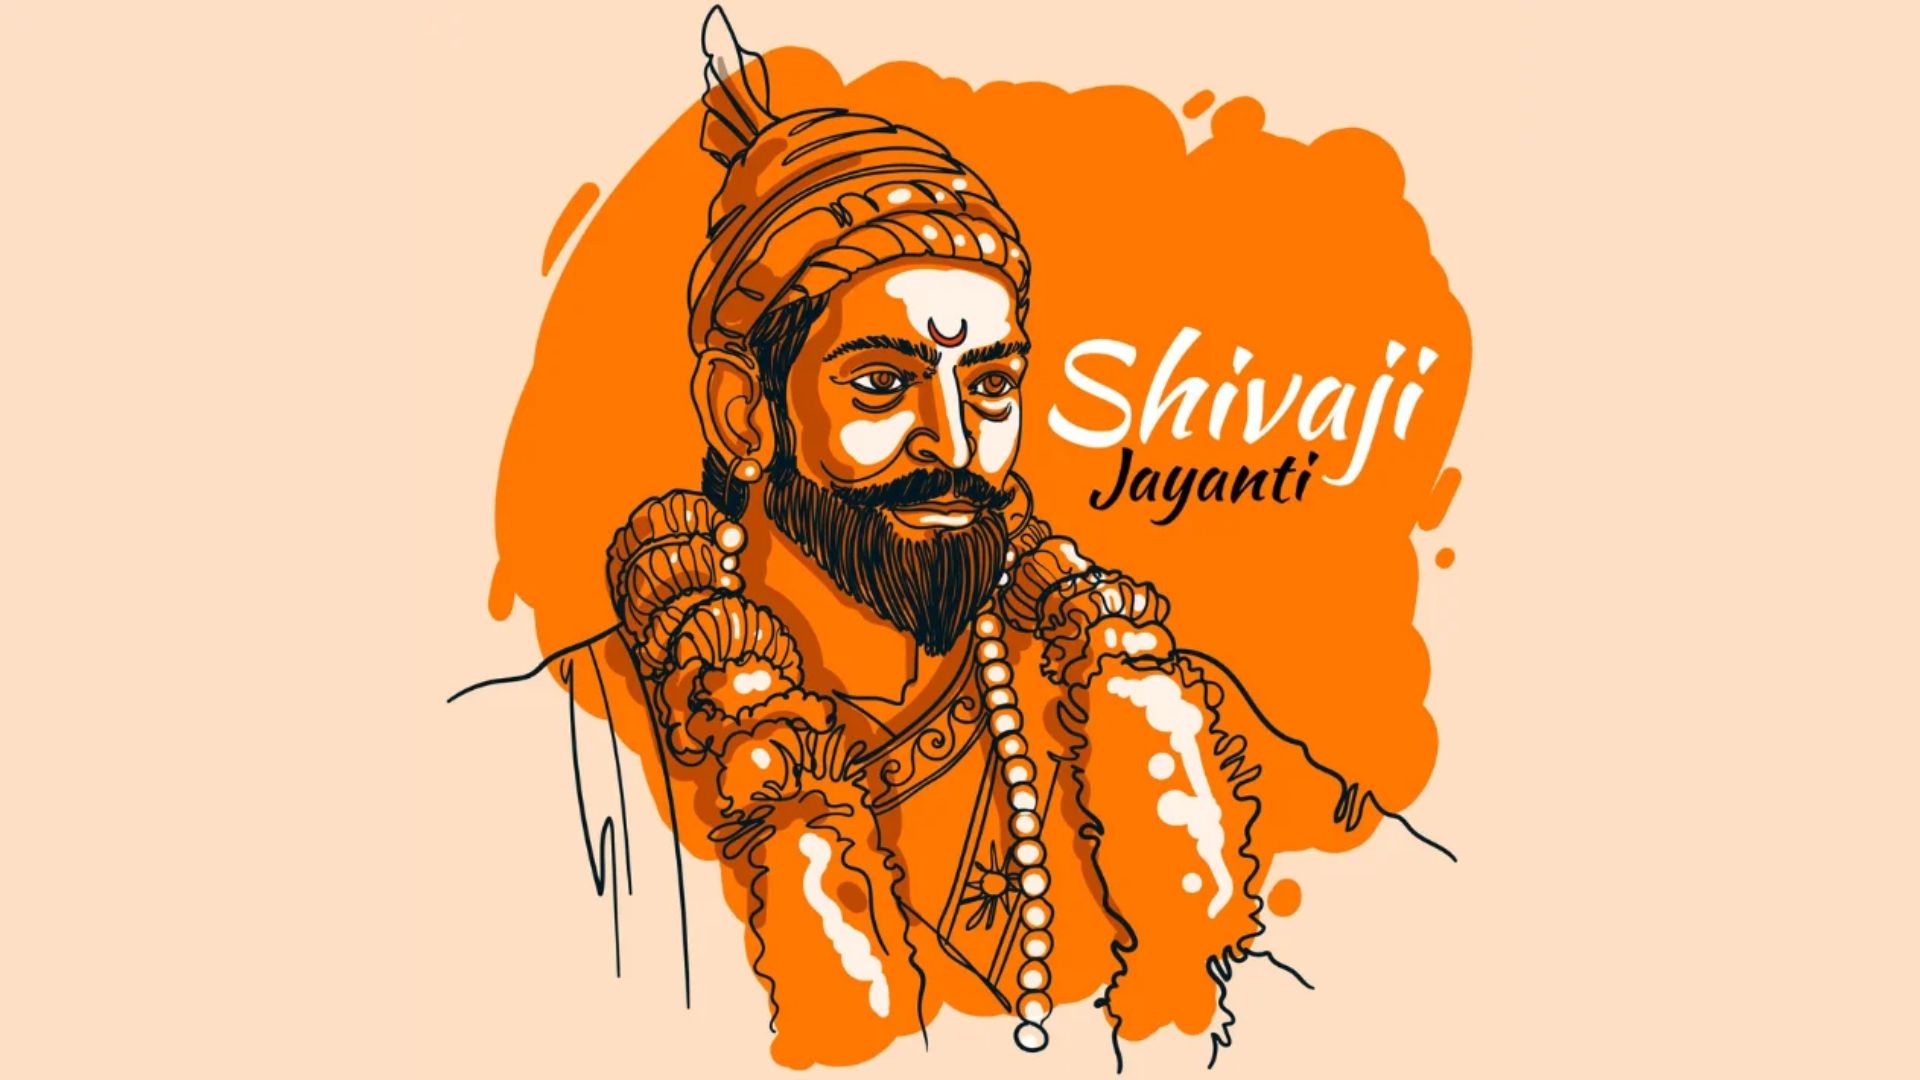 Gearing up for Shivaji Jayanti, a celebration of courage and patriotism